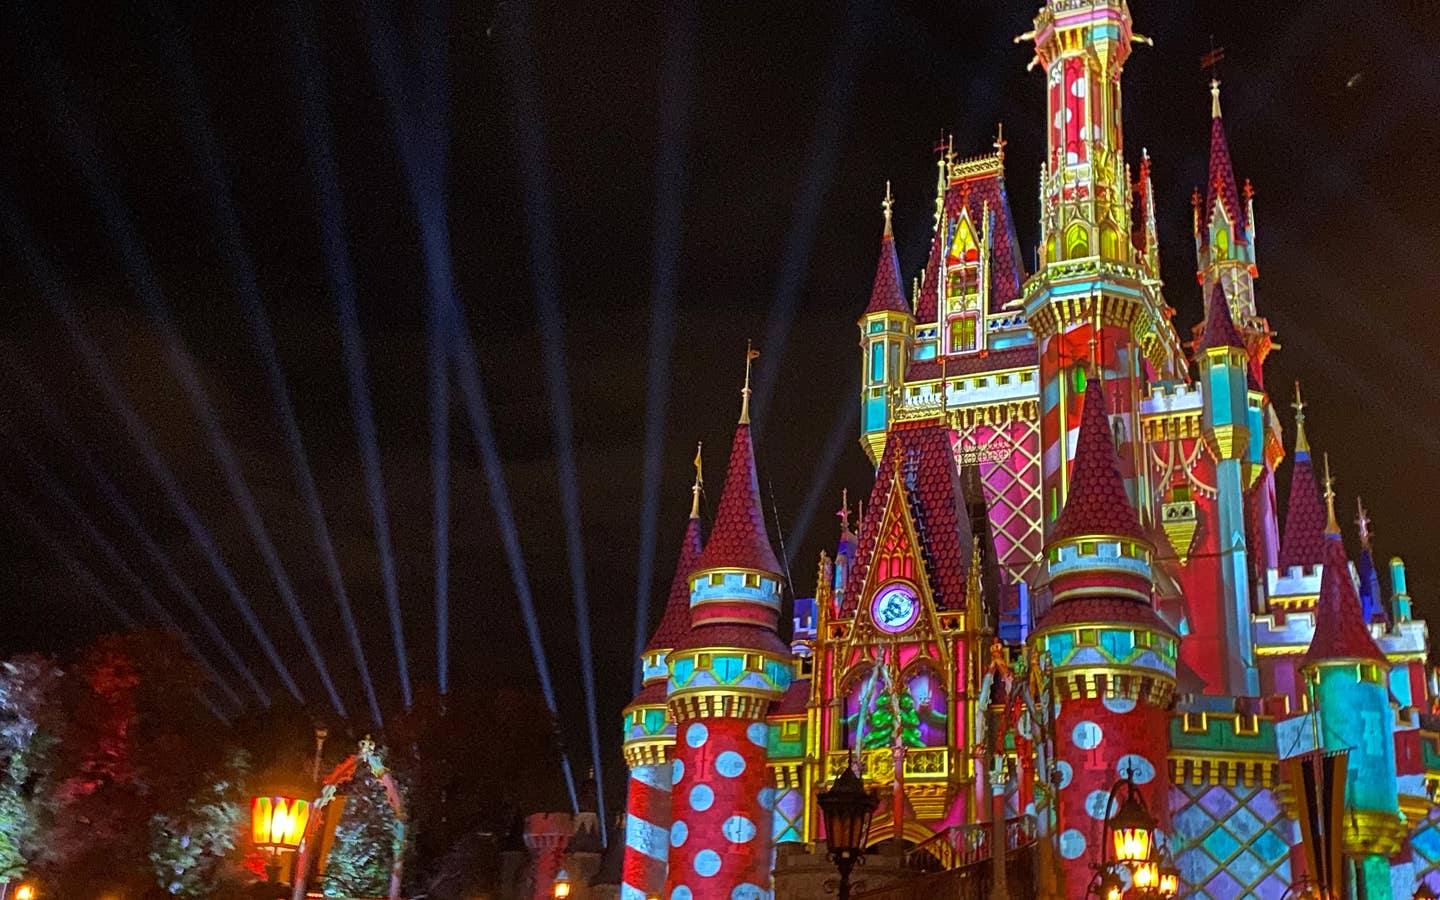 Cinderella's Castle at Magic Kingdom Park at Walt Disney World® Resort is illuminated with holiday projections at night.